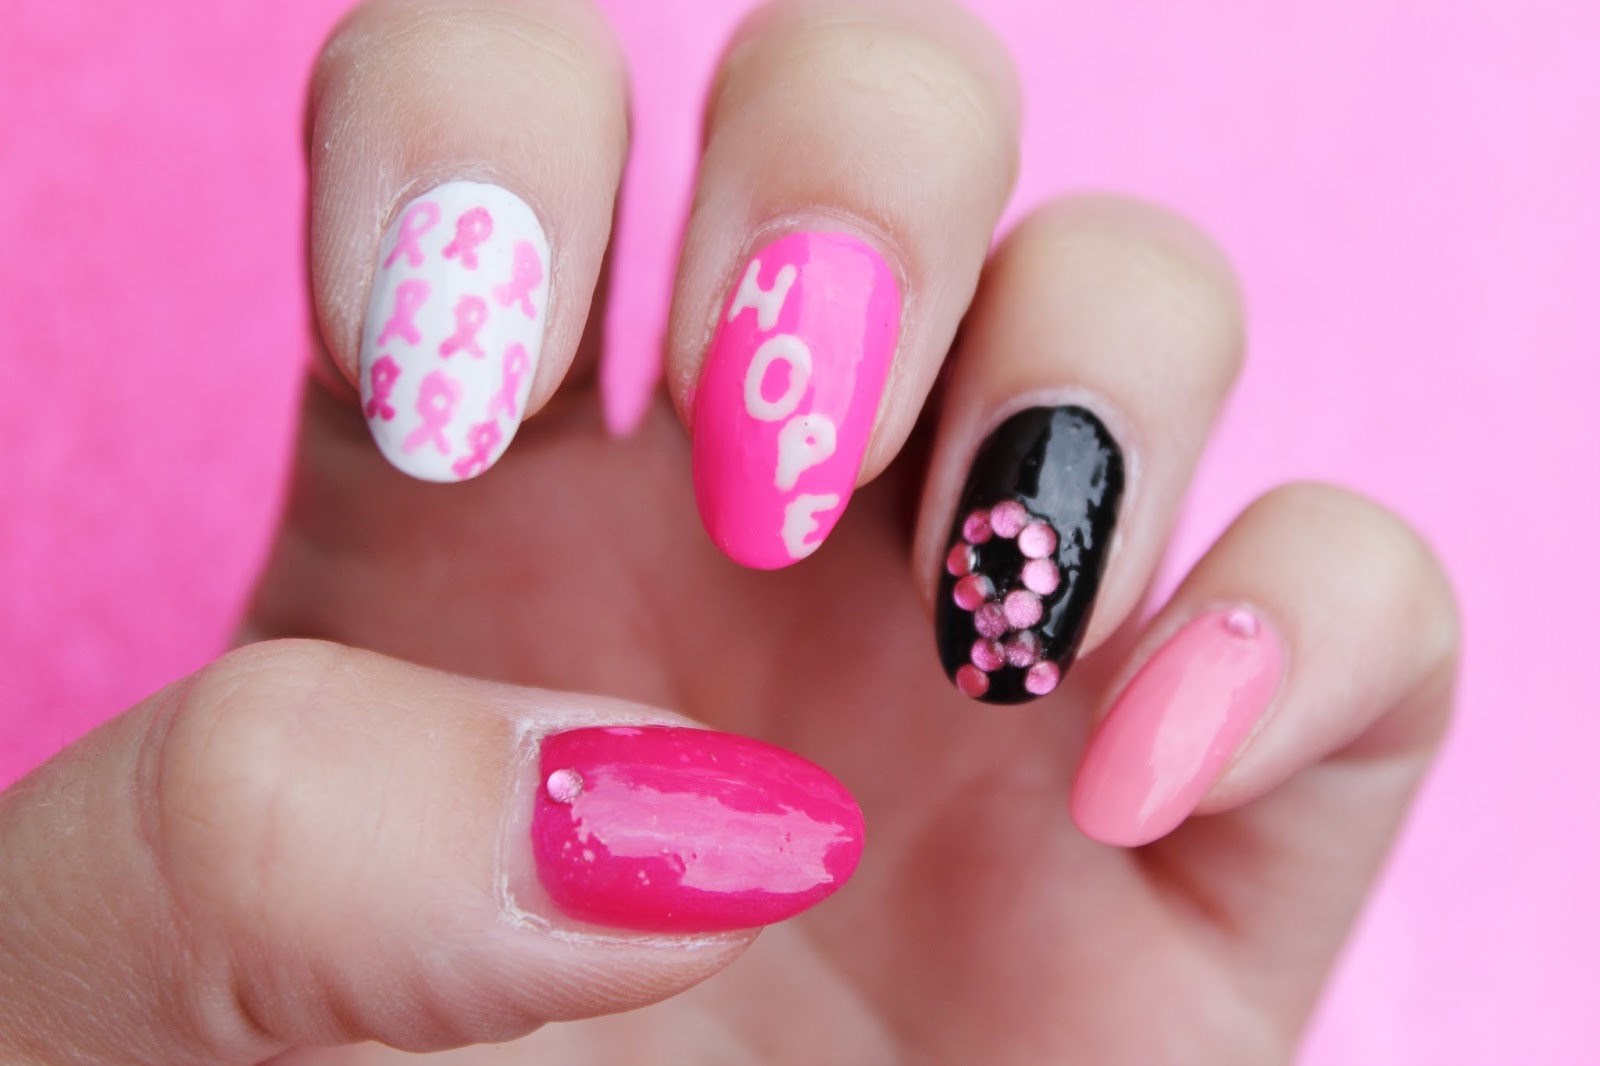 8. Nail Art for a Cure: 5 Designs to Raise Awareness for Childhood Cancer - wide 4